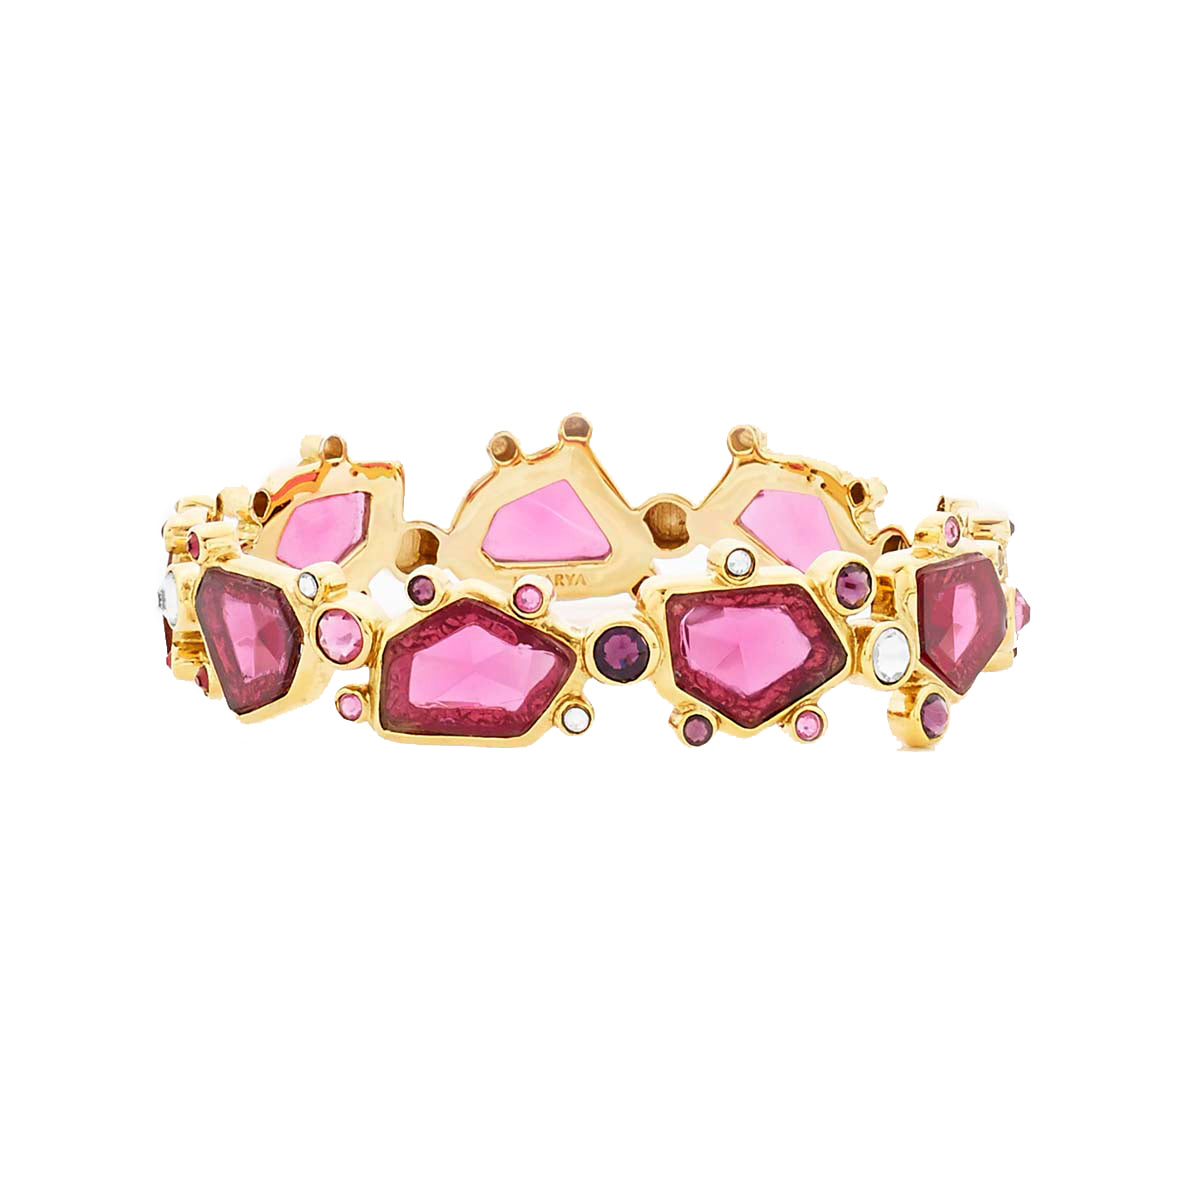 Wrists were made for more than just watches. Why not up the fun and flash factor with some power pink on your wrists, handcrafted with swarovski‚Äö√†√∂‚àö√°¬¨¬®‚àö√ú and 14k yellow gold plated.